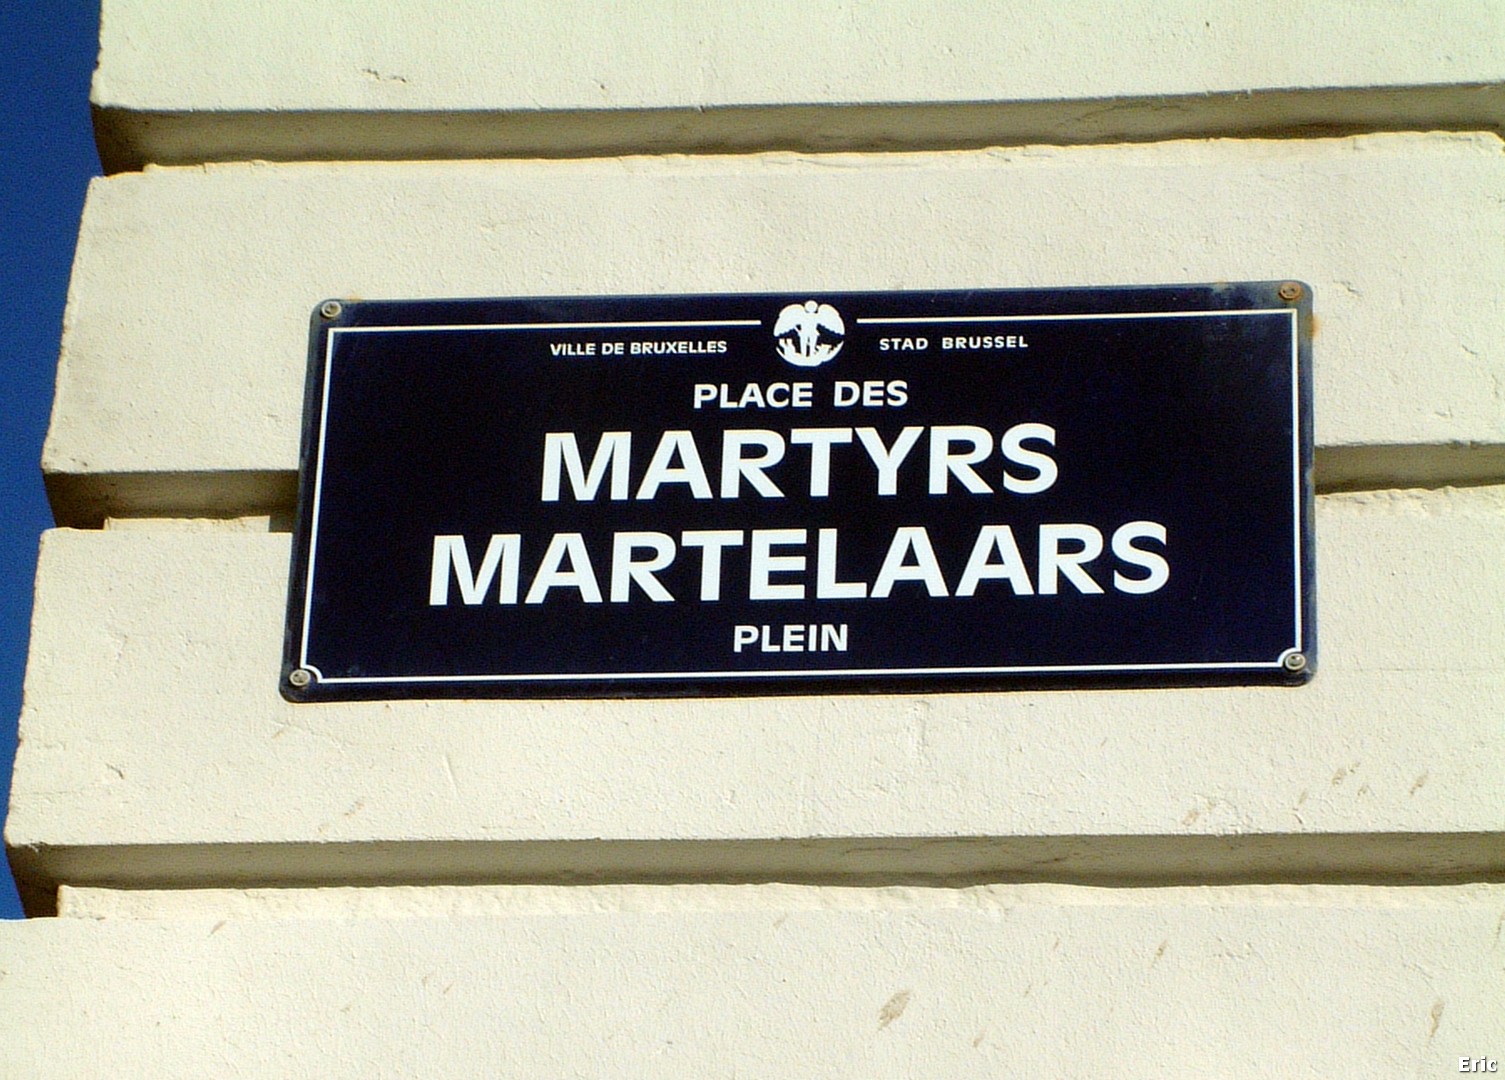  Martyrs